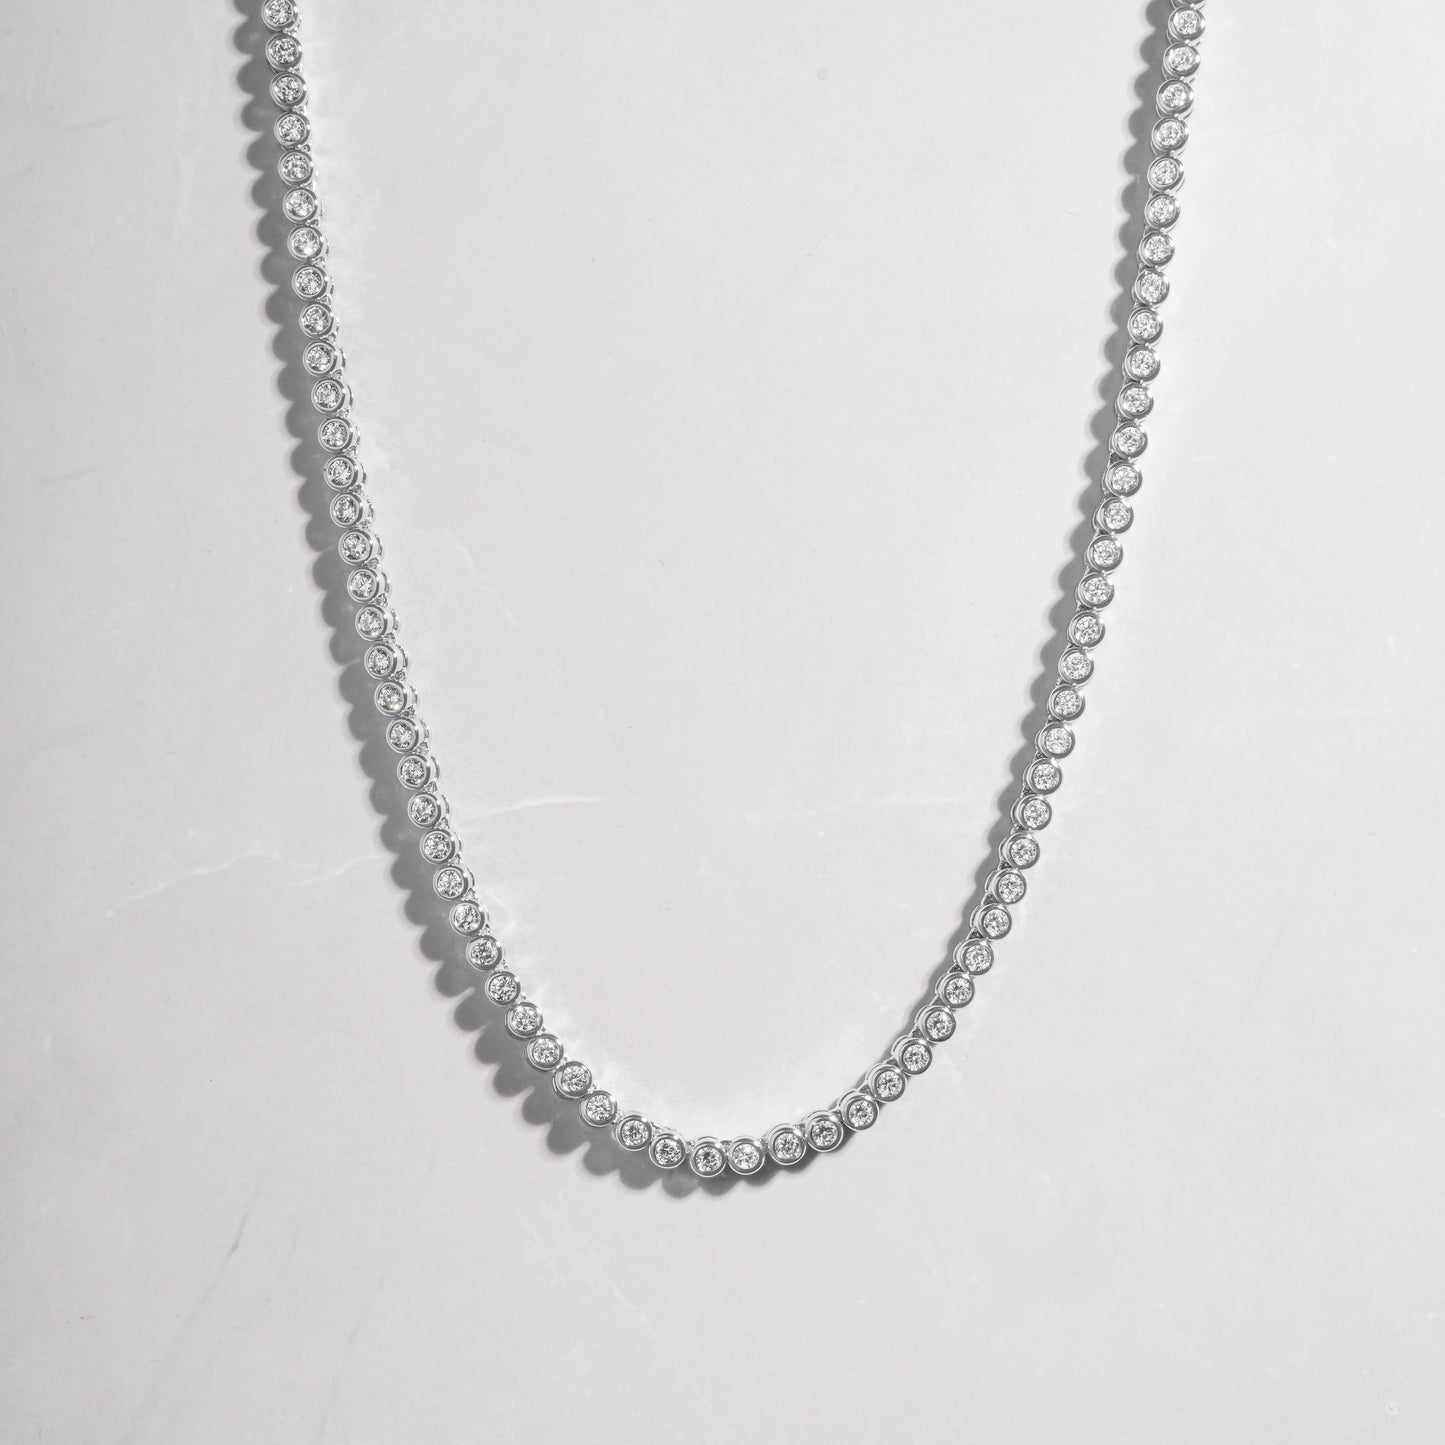 a silver necklace with beads on a white background